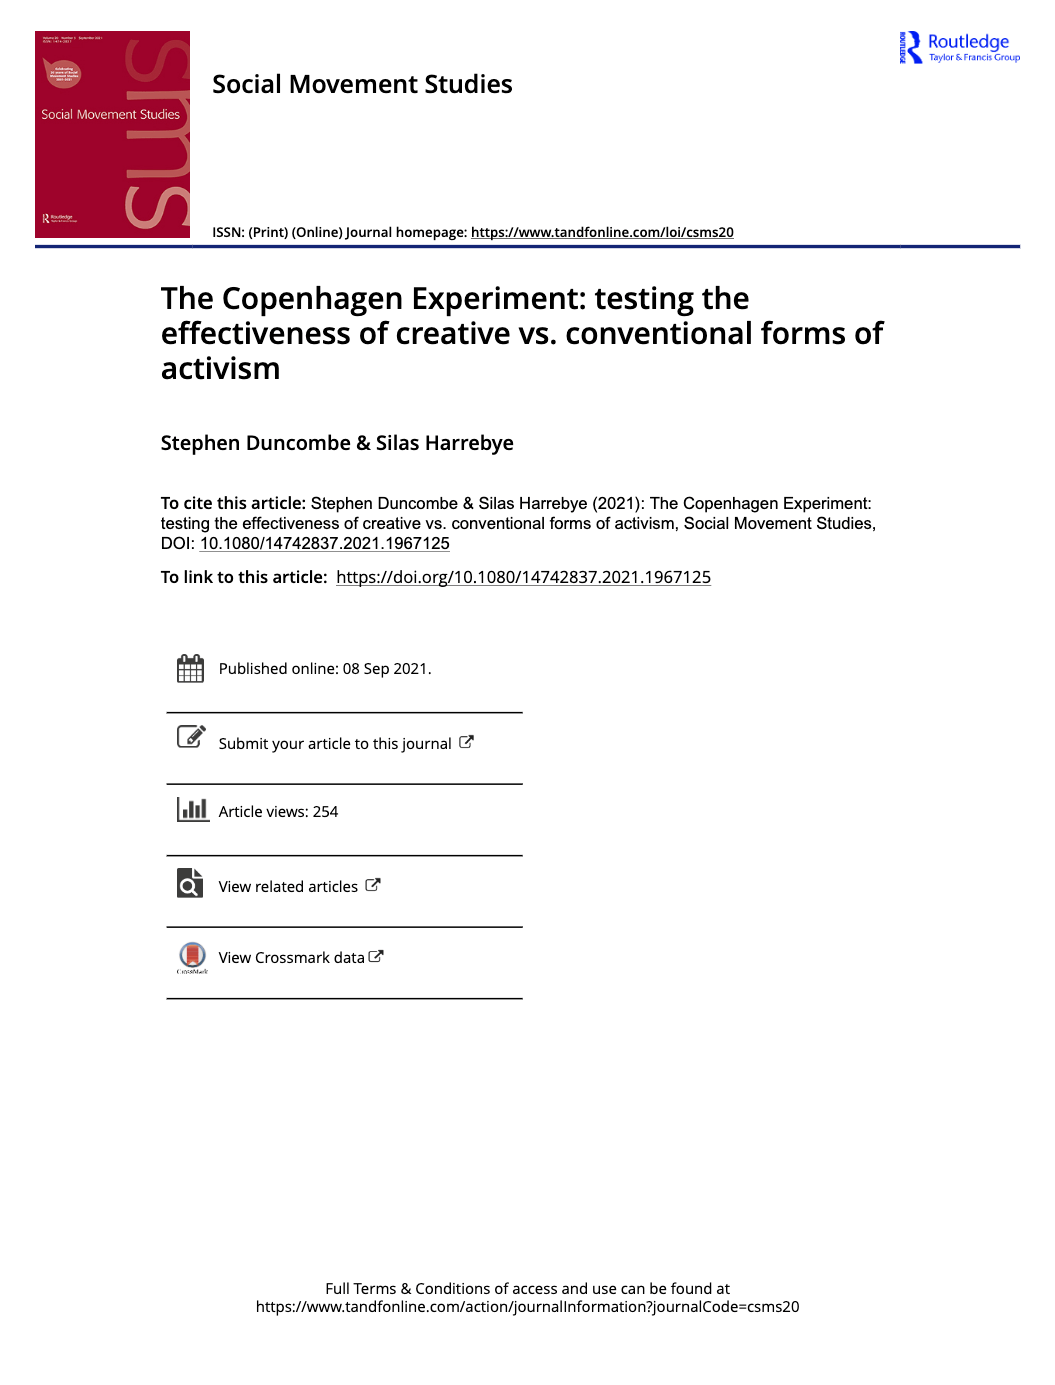 Screenshot of The Copenhagen Experiment Published in Social Movement Studies academic research